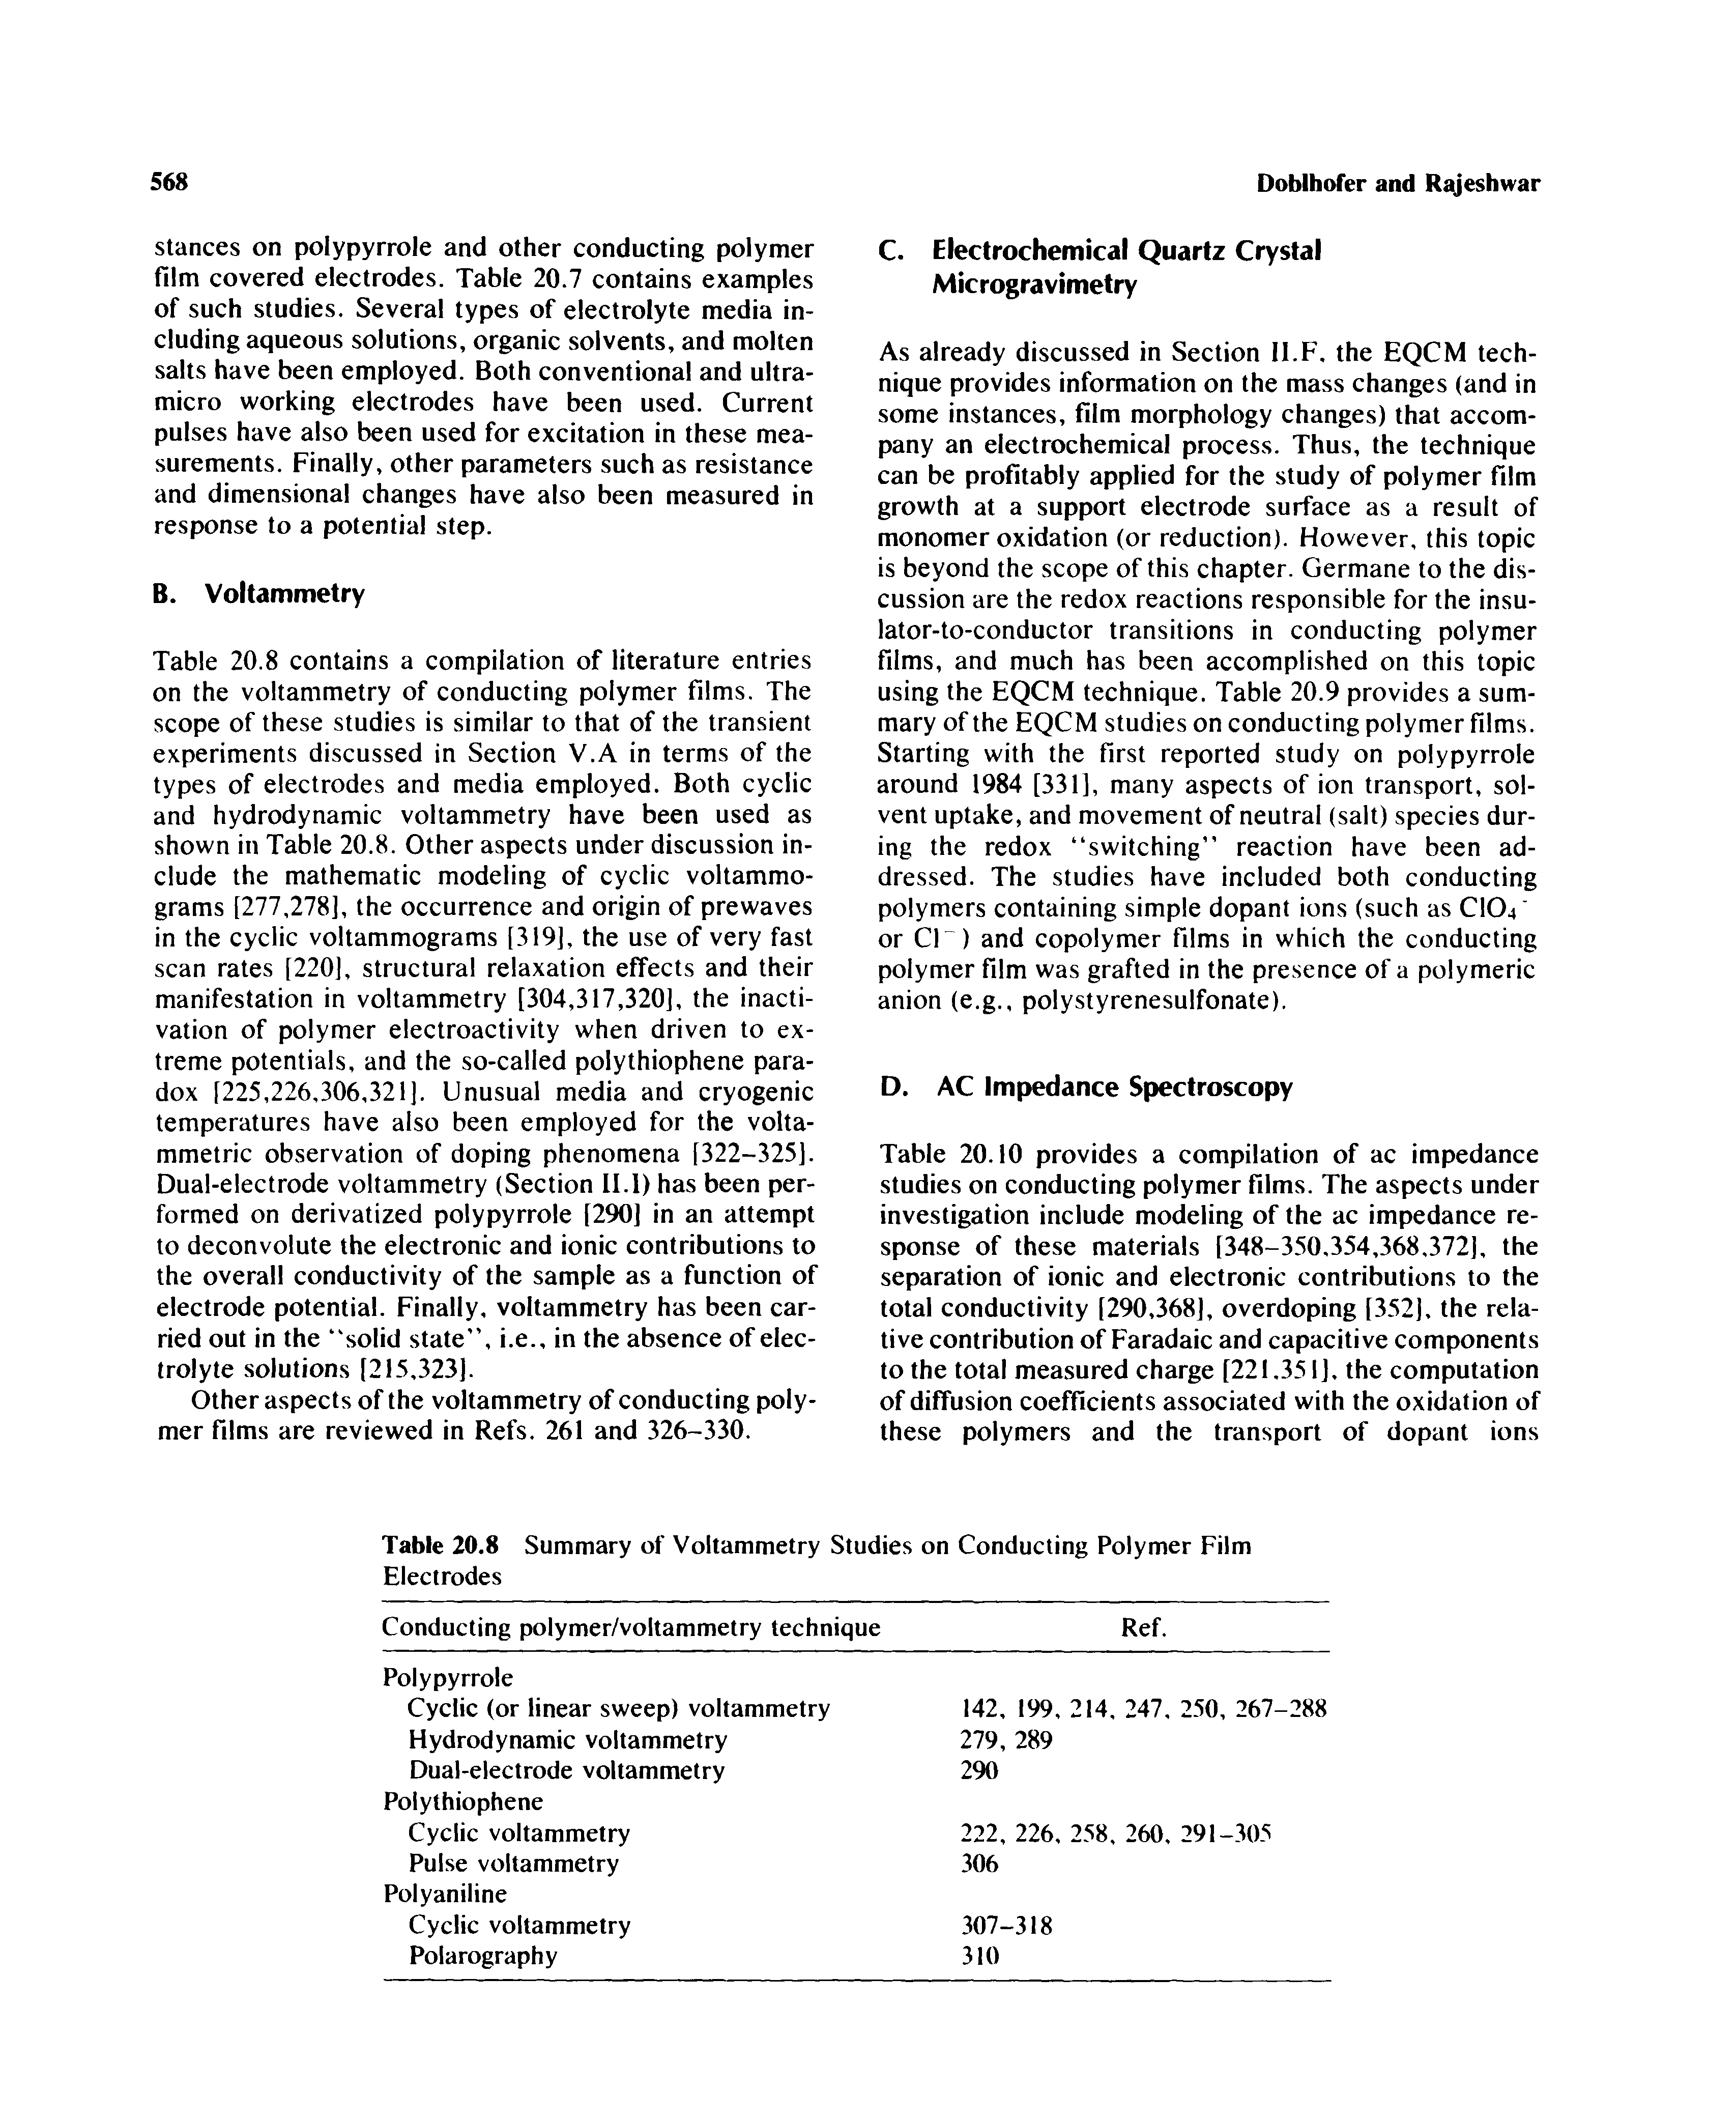 Table 20.8 contains a compilation of literature entries on the voltammetry of conducting polymer films. The scope of these studies is similar to that of the transient experiments discussed in Section V.A in terms of the types of electrodes and media employed. Both cyclic and hydrodynamic voltammetry have been used as shown in Table 20.8. Other aspects under discussion include the mathematic modeling of cyclic voltammo-grams [277,278], the occurrence and origin of prewaves in the cyclic voltammograms [319], the use of very fast scan rates [220], structural relaxation effects and their manifestation in voltammetry [304,317,320], the inactivation of polymer electroactivity when driven to extreme potentials, and the so-called polythiophene paradox [225,226,306,321]. Unusual media and cryogenic temperatures have also been employed for the volta-mmetric observation of doping phenomena [322-325]. Dual-electrode voltammetry (Section II.1) has been performed on derivatized polypyrrole [290] in an attempt to deconvolute the electronic and ionic contributions to the overall conductivity of the sample as a function of electrode potential. Finally, voltammetry has been carried out in the solid state , i.e., in the absence of electrolyte solutions [215,323].